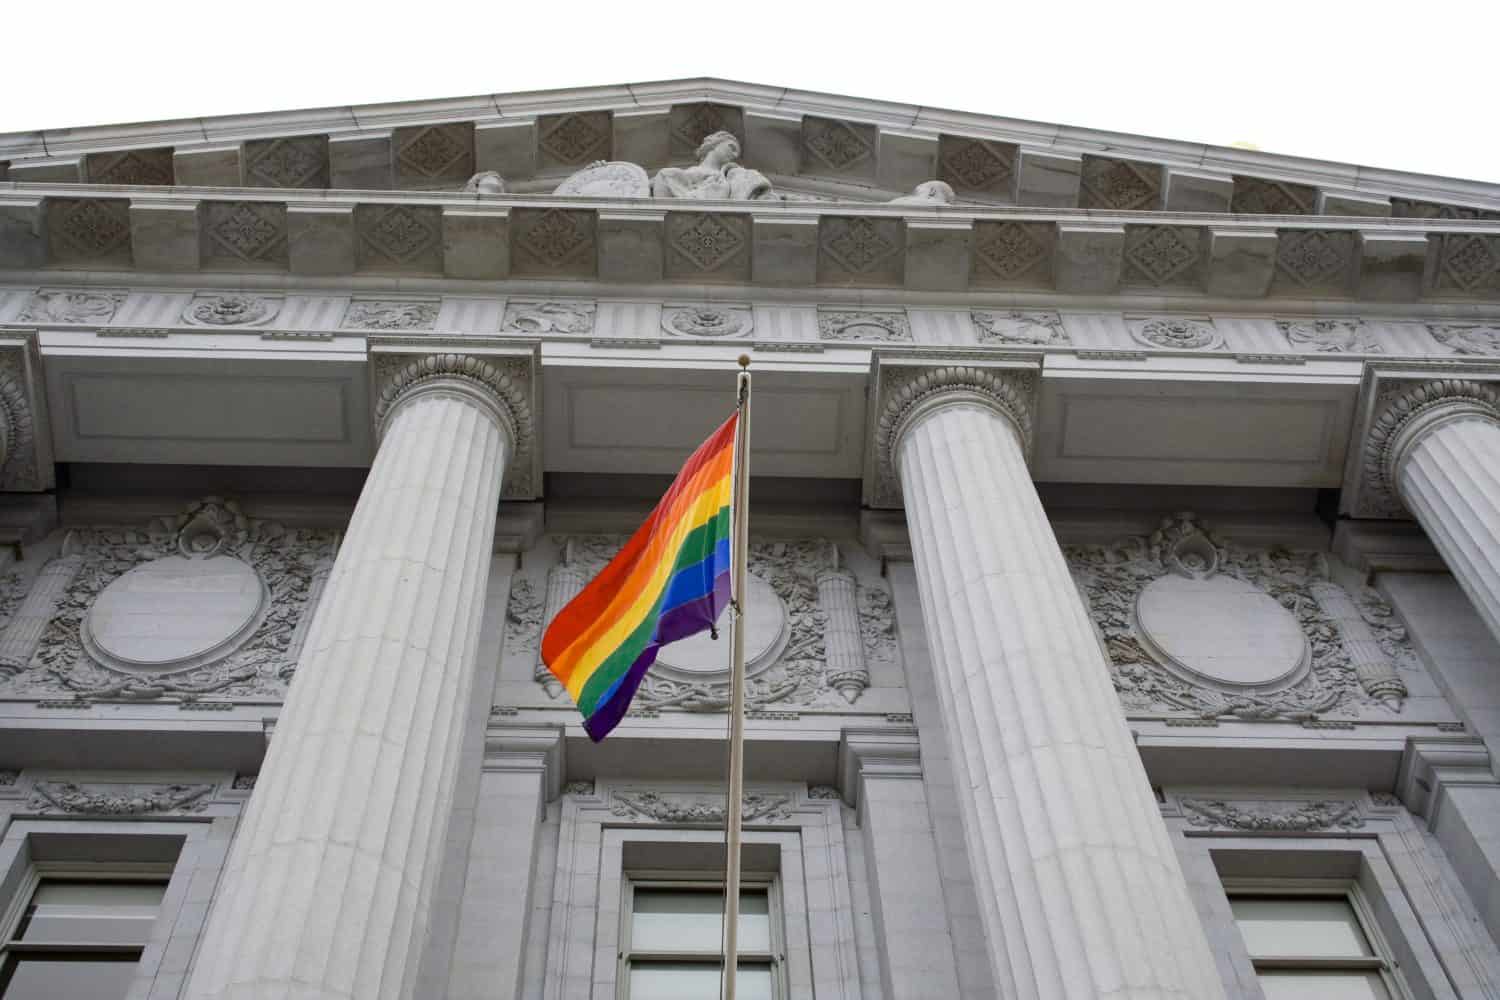 Lesbian, gay, bisexual, and transgender pride flag flying outside a government building